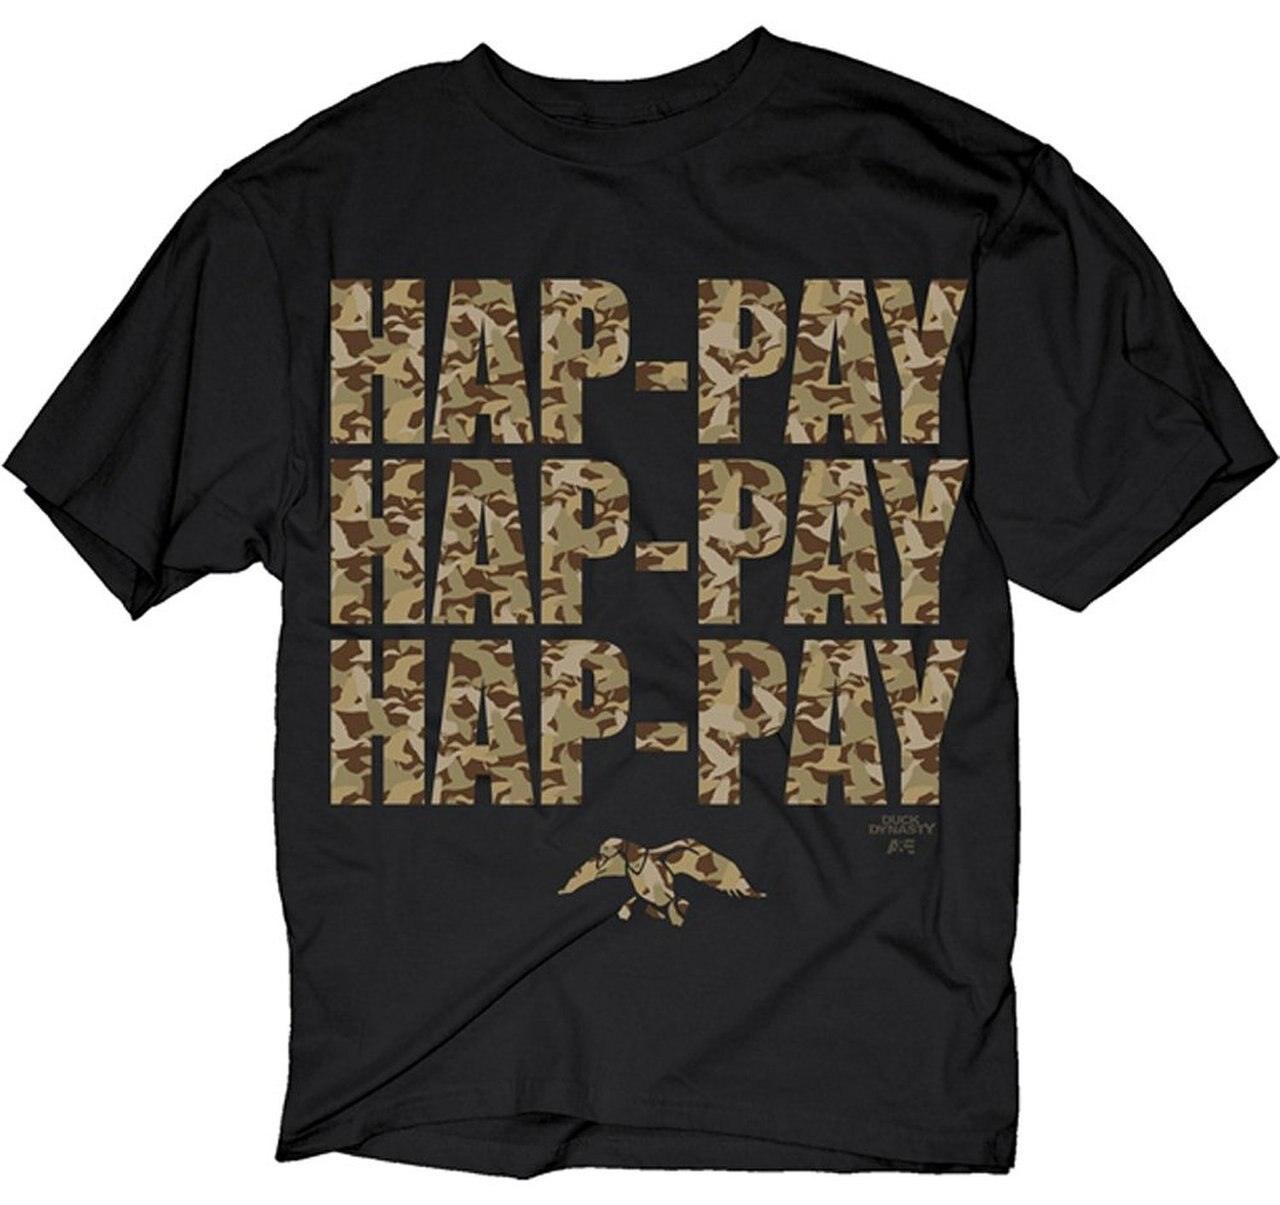 Hap-pay Hap-pay Hap-pay T-Shirt with Letters in Camo Print-tvso